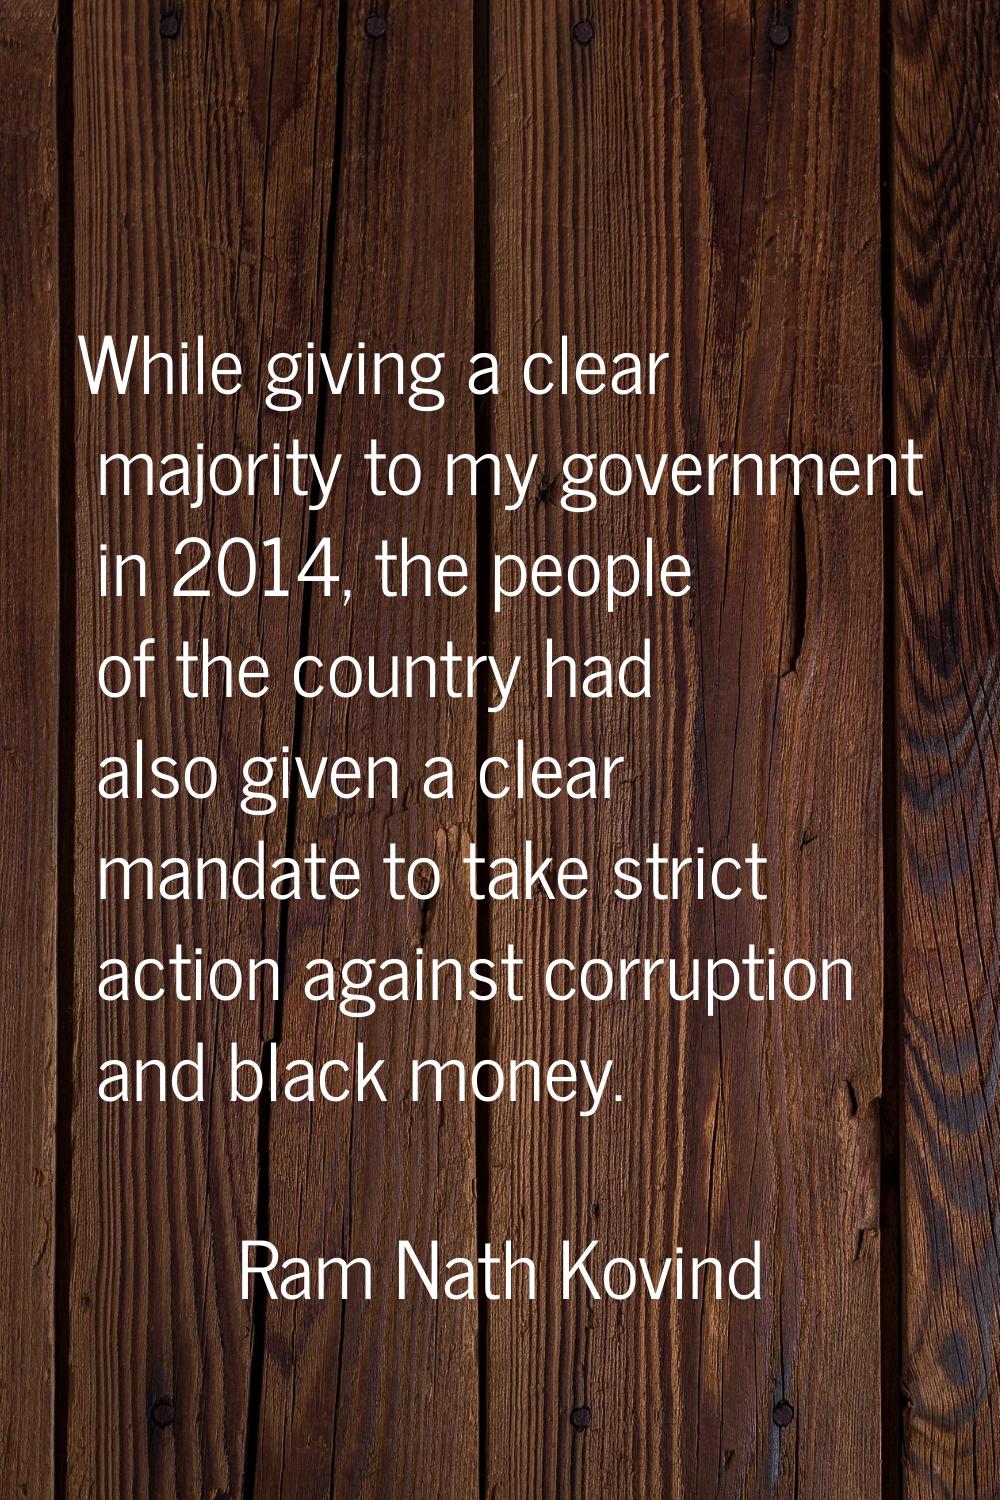 While giving a clear majority to my government in 2014, the people of the country had also given a 